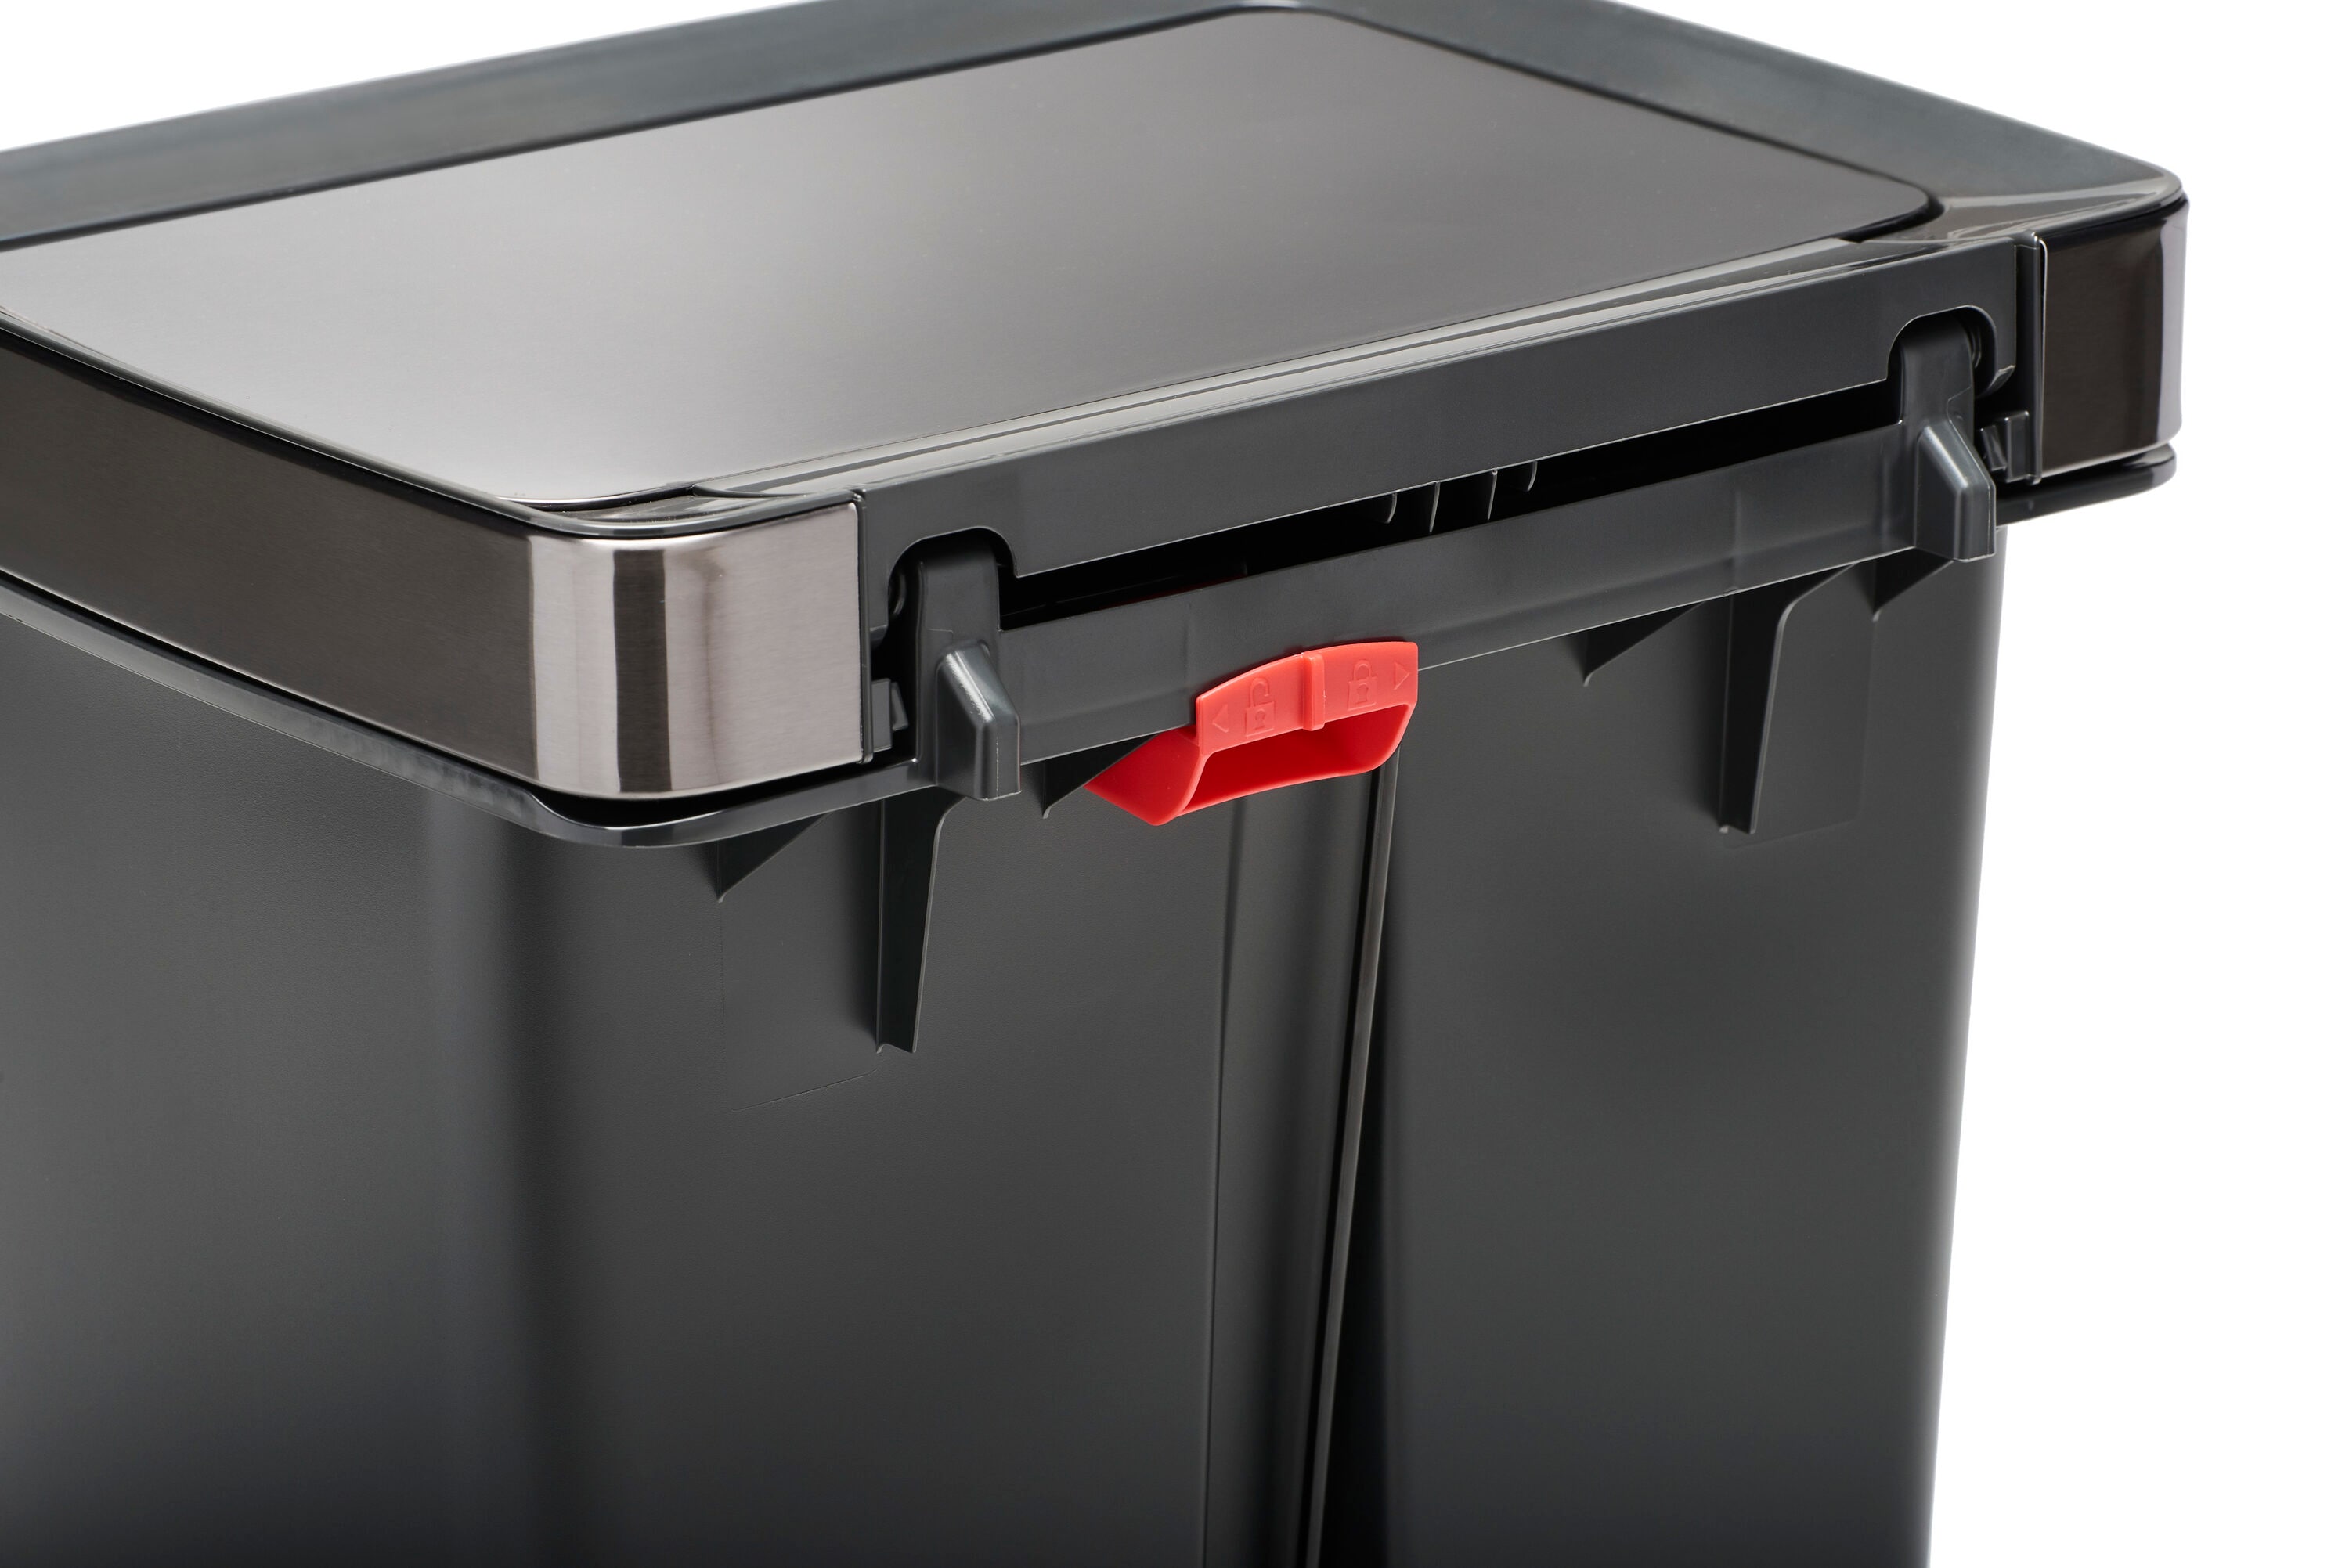 Rubbermaid Premier High-Capacity Step-On Trash Can, 19 Gallon, Charcoal,  Stainless-Steel Rim, Lid Lock, Quiet Lid, for Home/Kitchen/Common Space